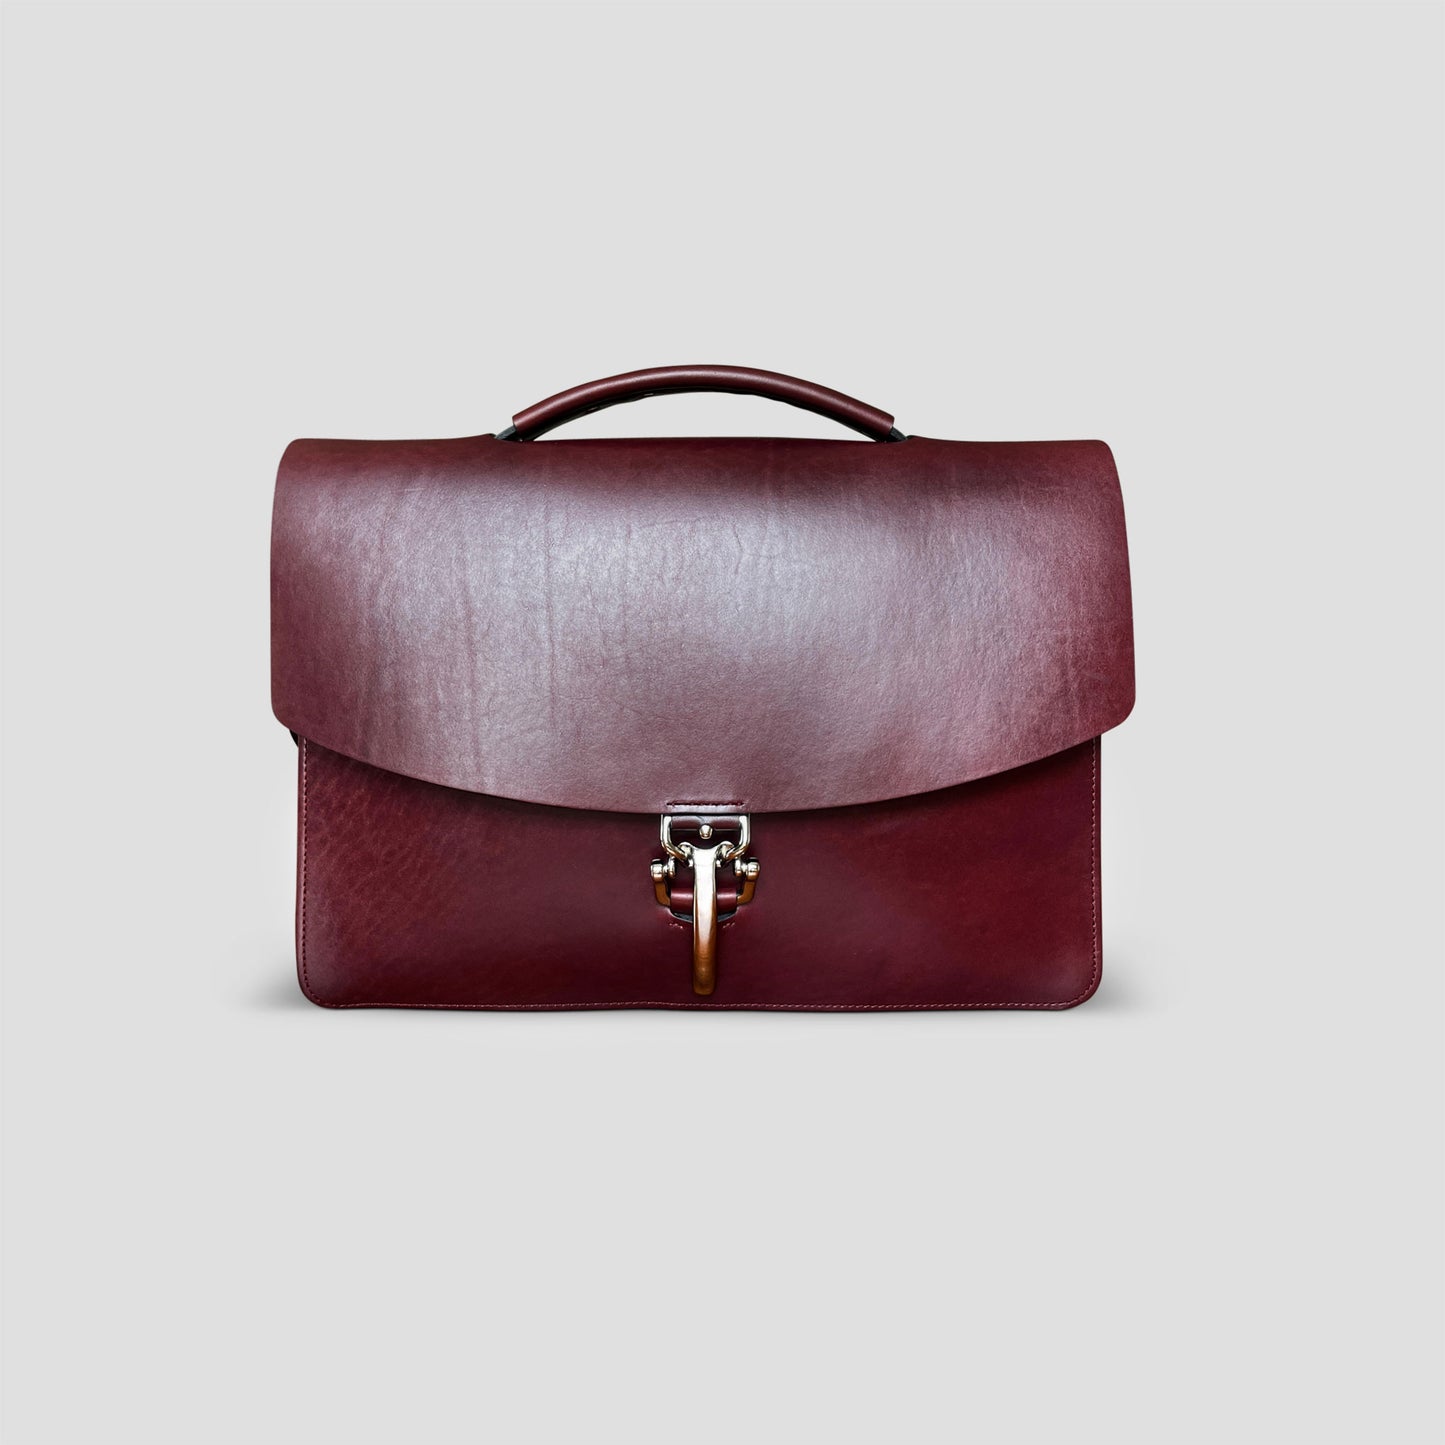 The Curvlinear from Basader - a handmade full grain leather briefcase with hardware closure